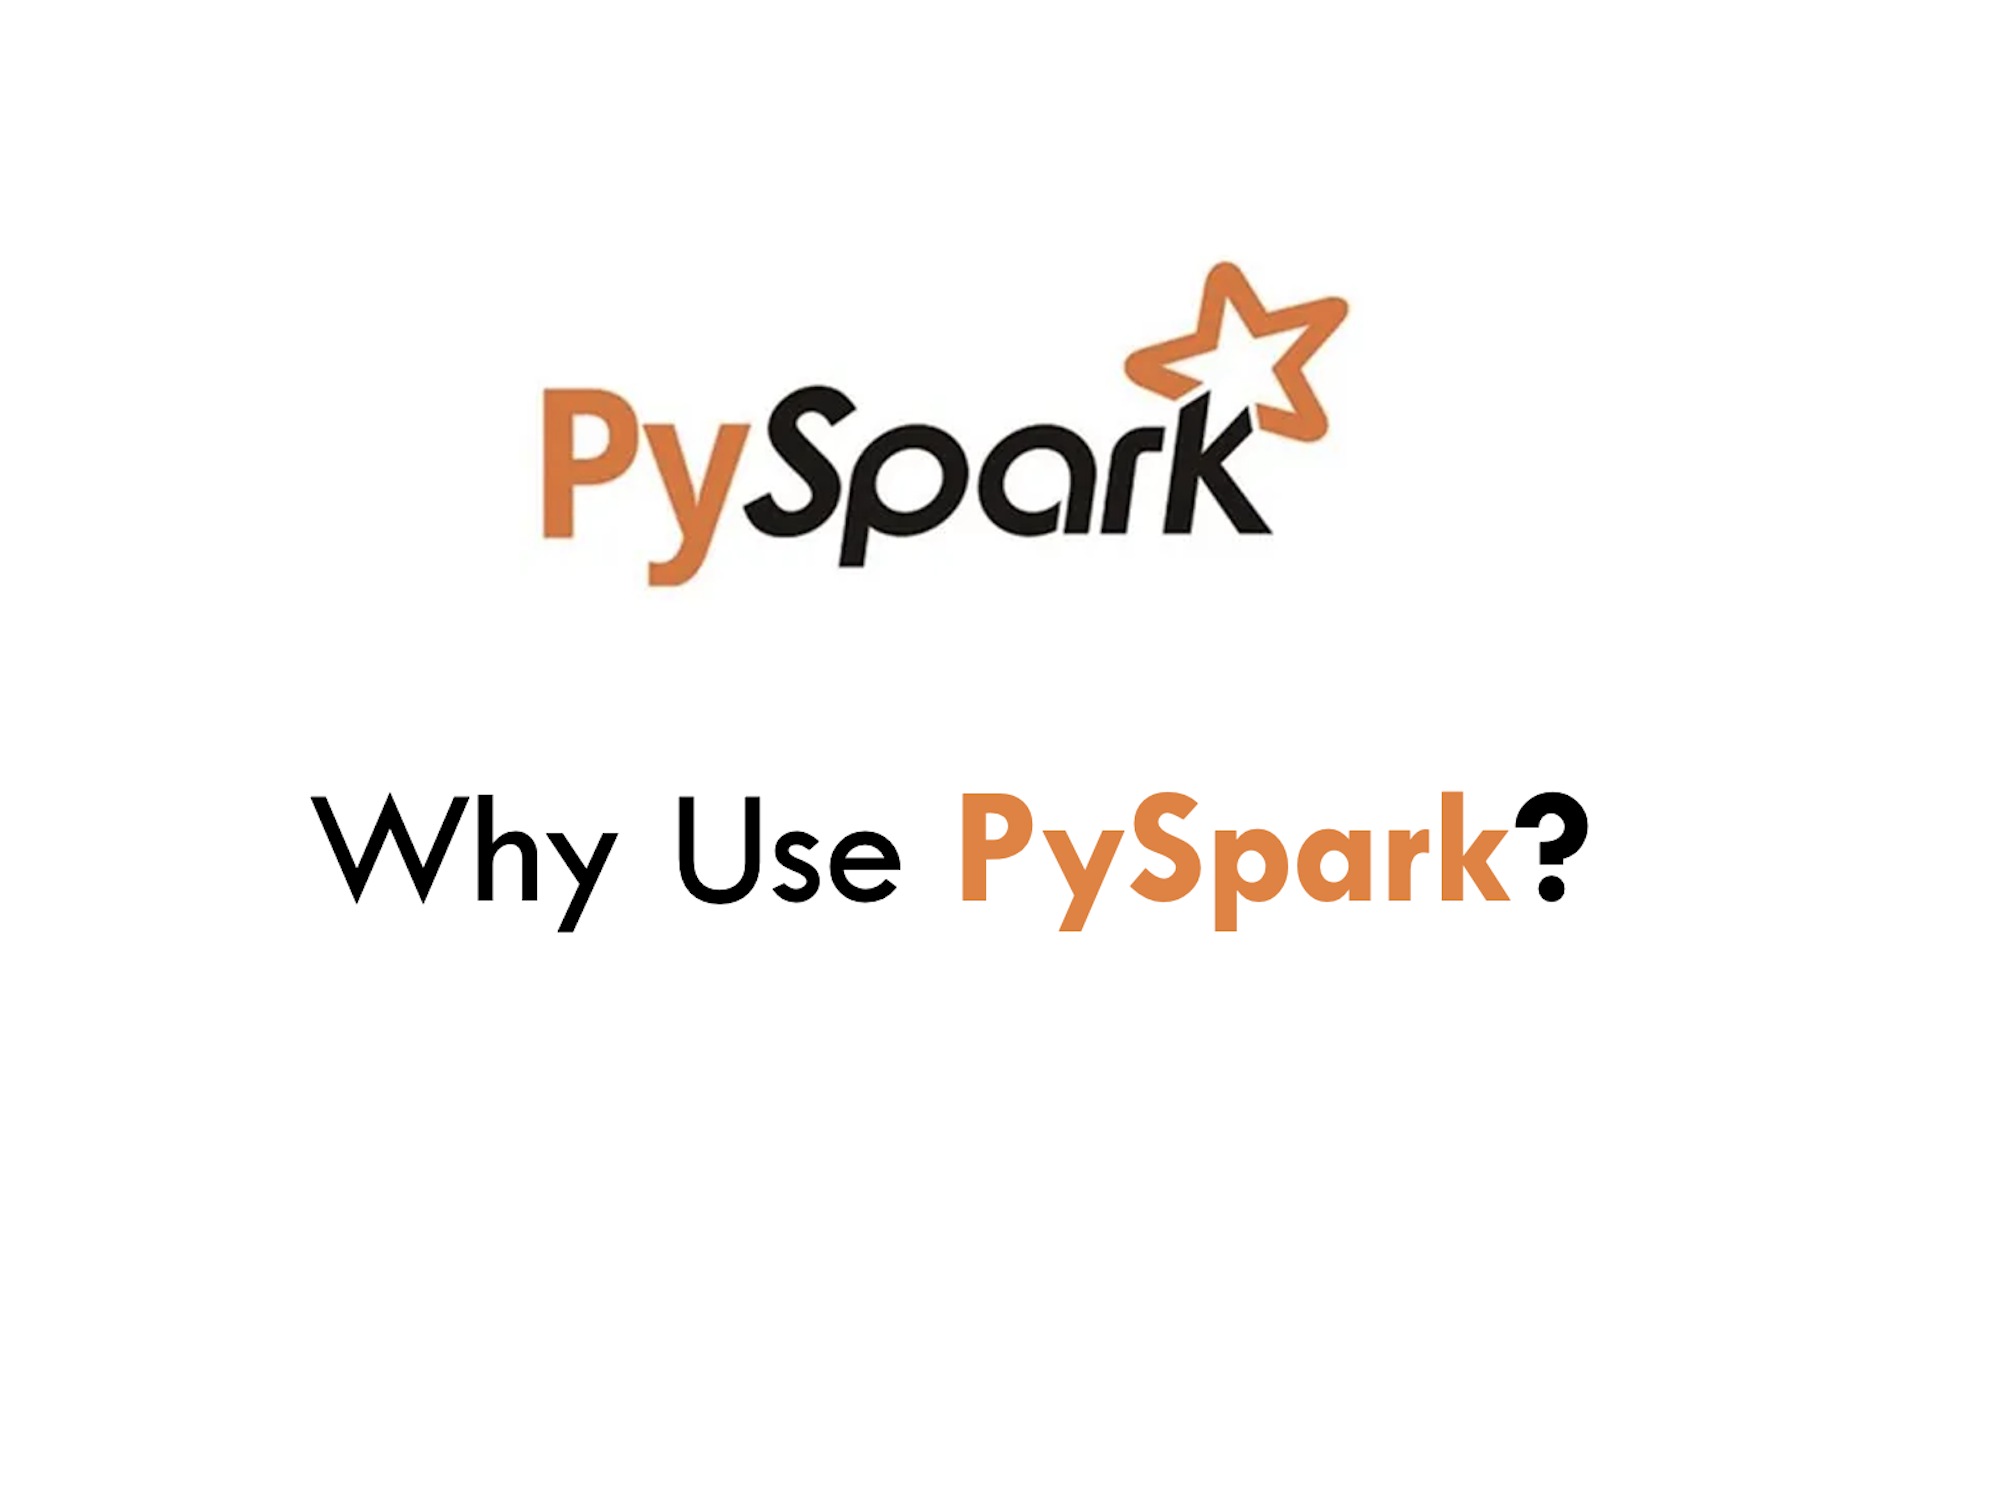 Why Use PySpark?